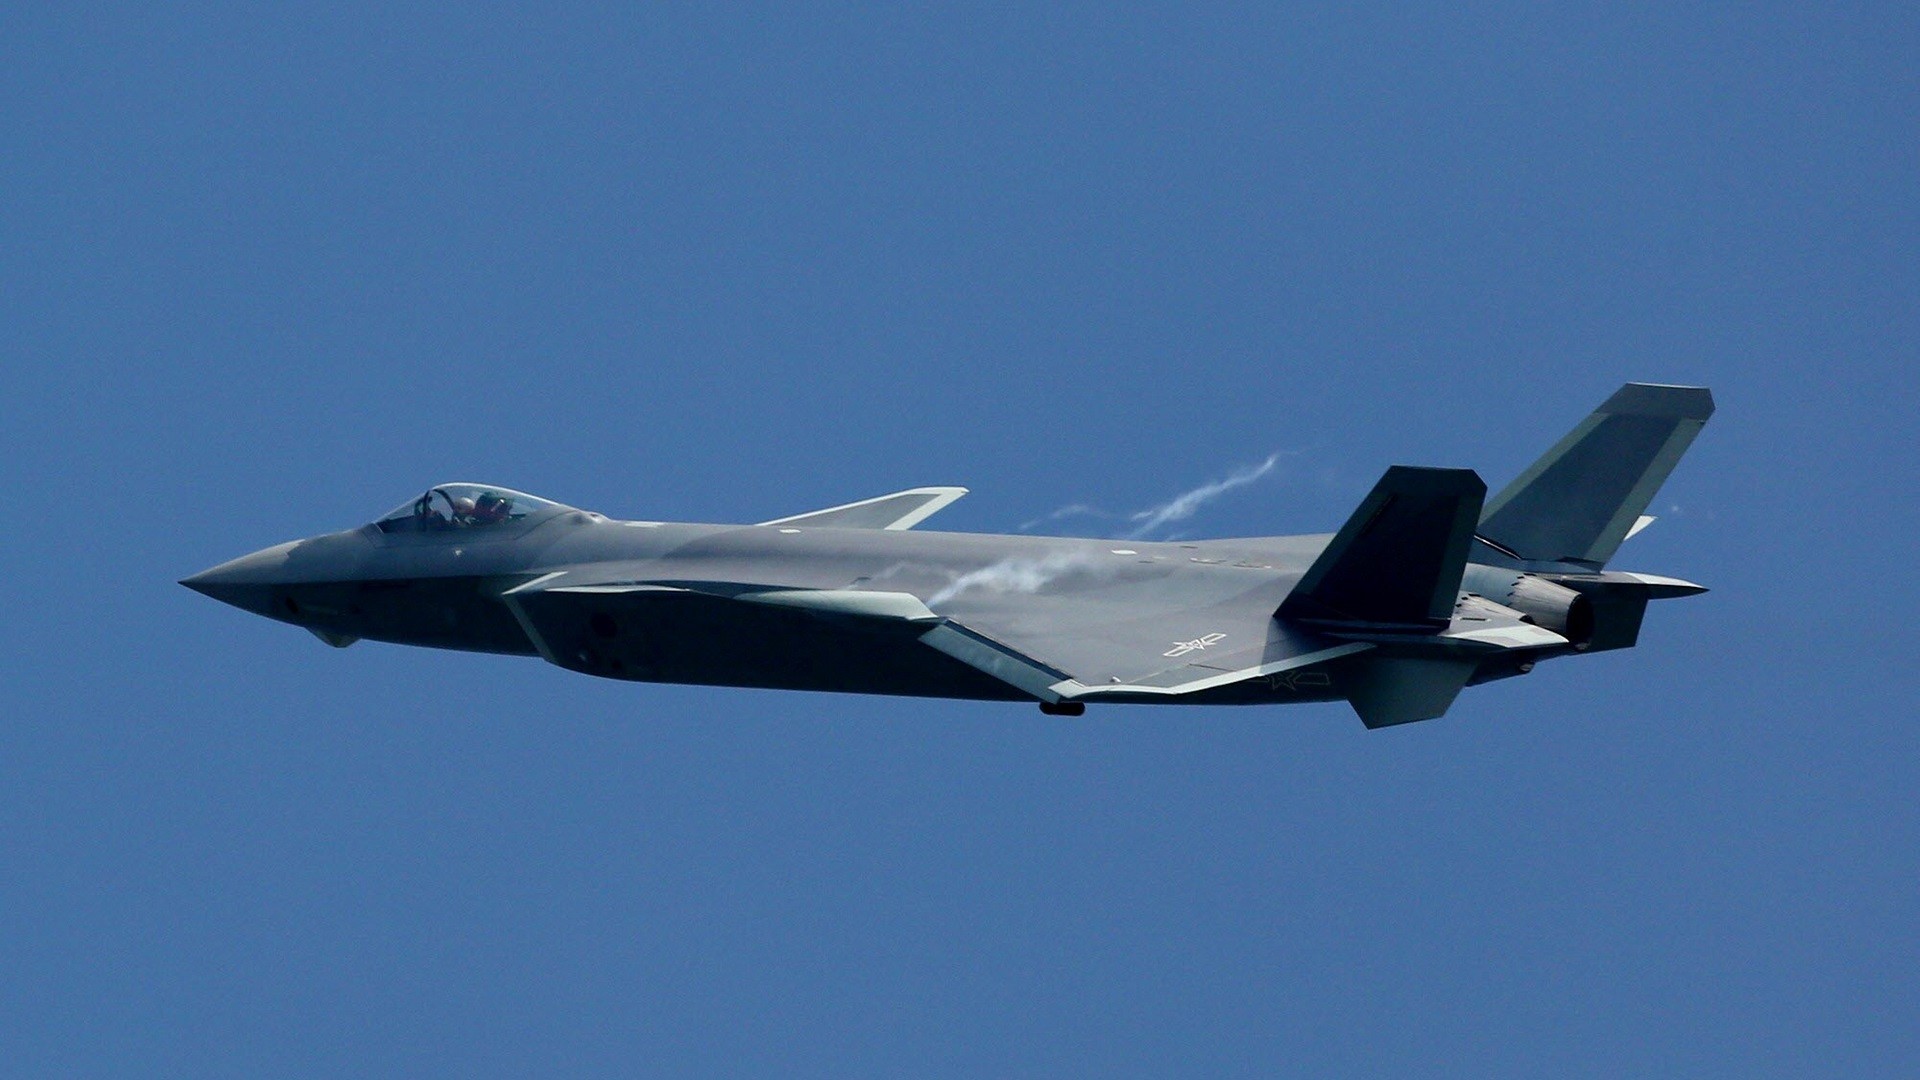 PLAAF Military Aircraft Aircraft J 20 Stealth Fighter 1920x1080